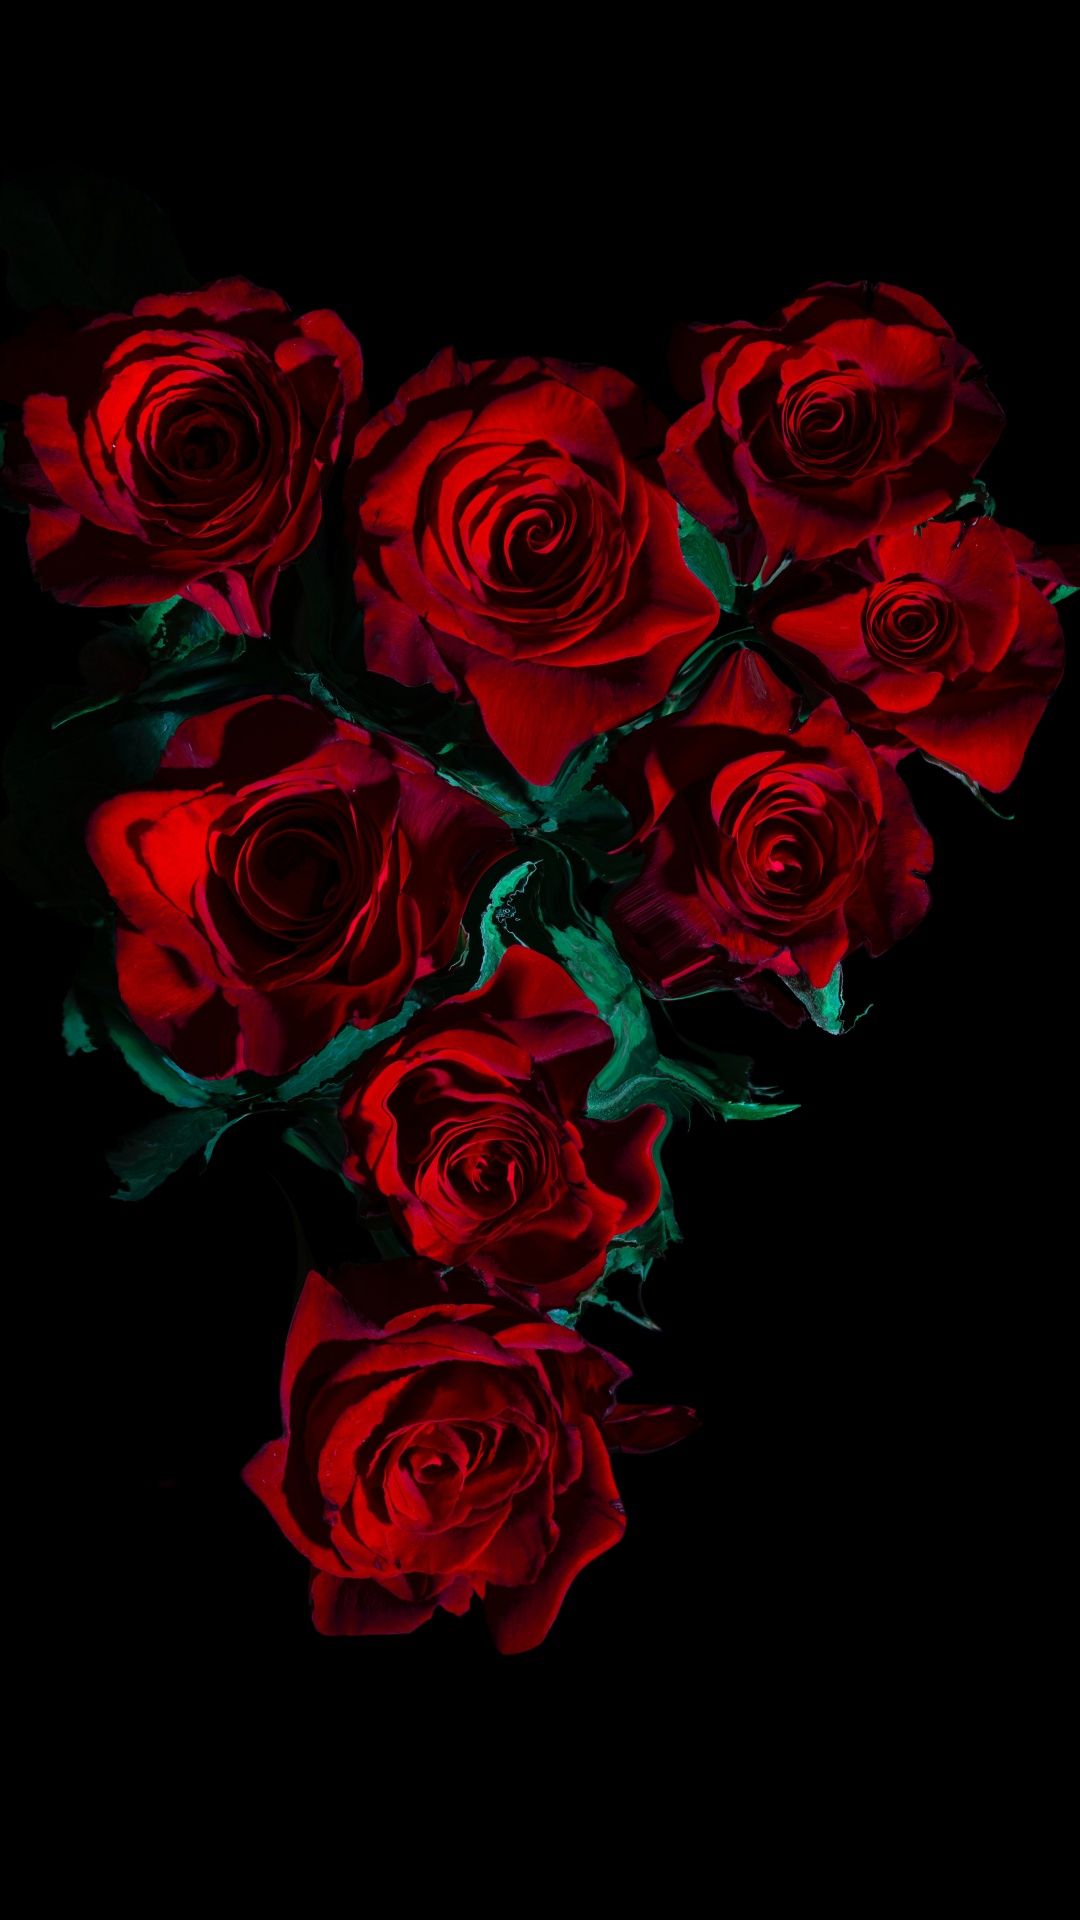 A group of red roses in the shape - Roses